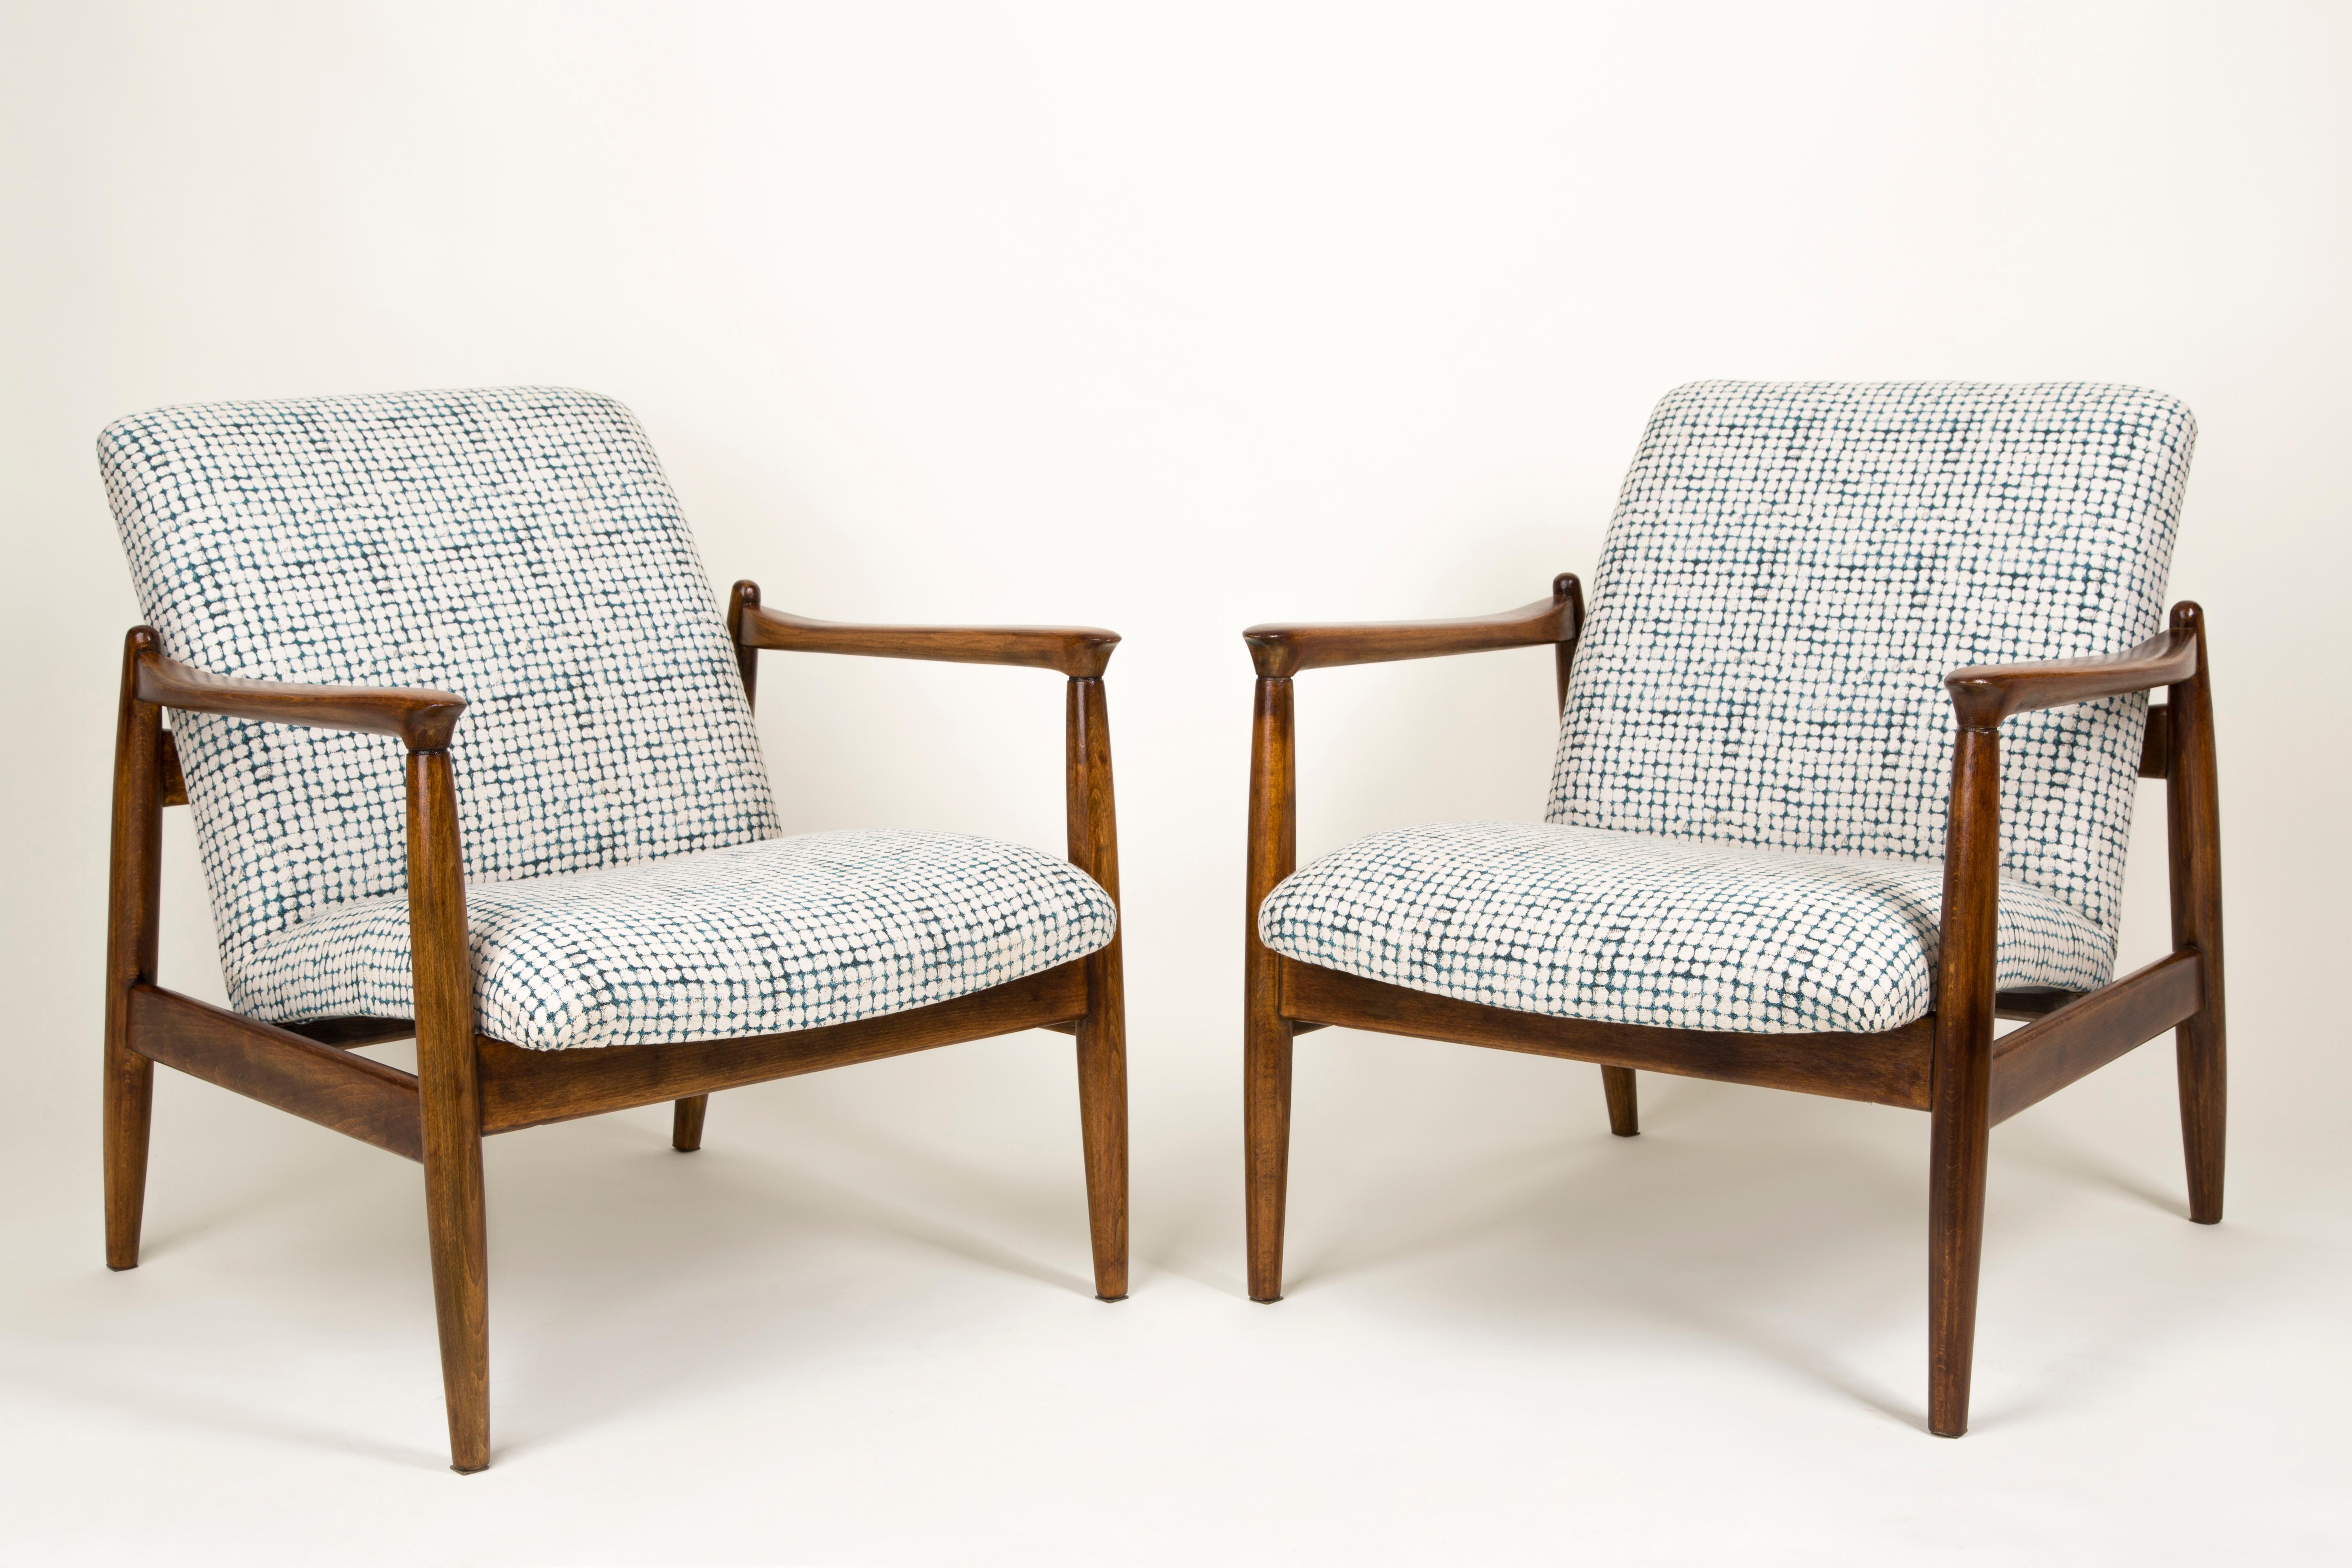 A pair of beautiful armchairs, designed by Edmund Homa. The armchairs were made in the 1960s in the Gosciecinska Furniture Factory. They are made from solid beechwood. The GFM type armchair is regarded one of the best polish armchair design from the